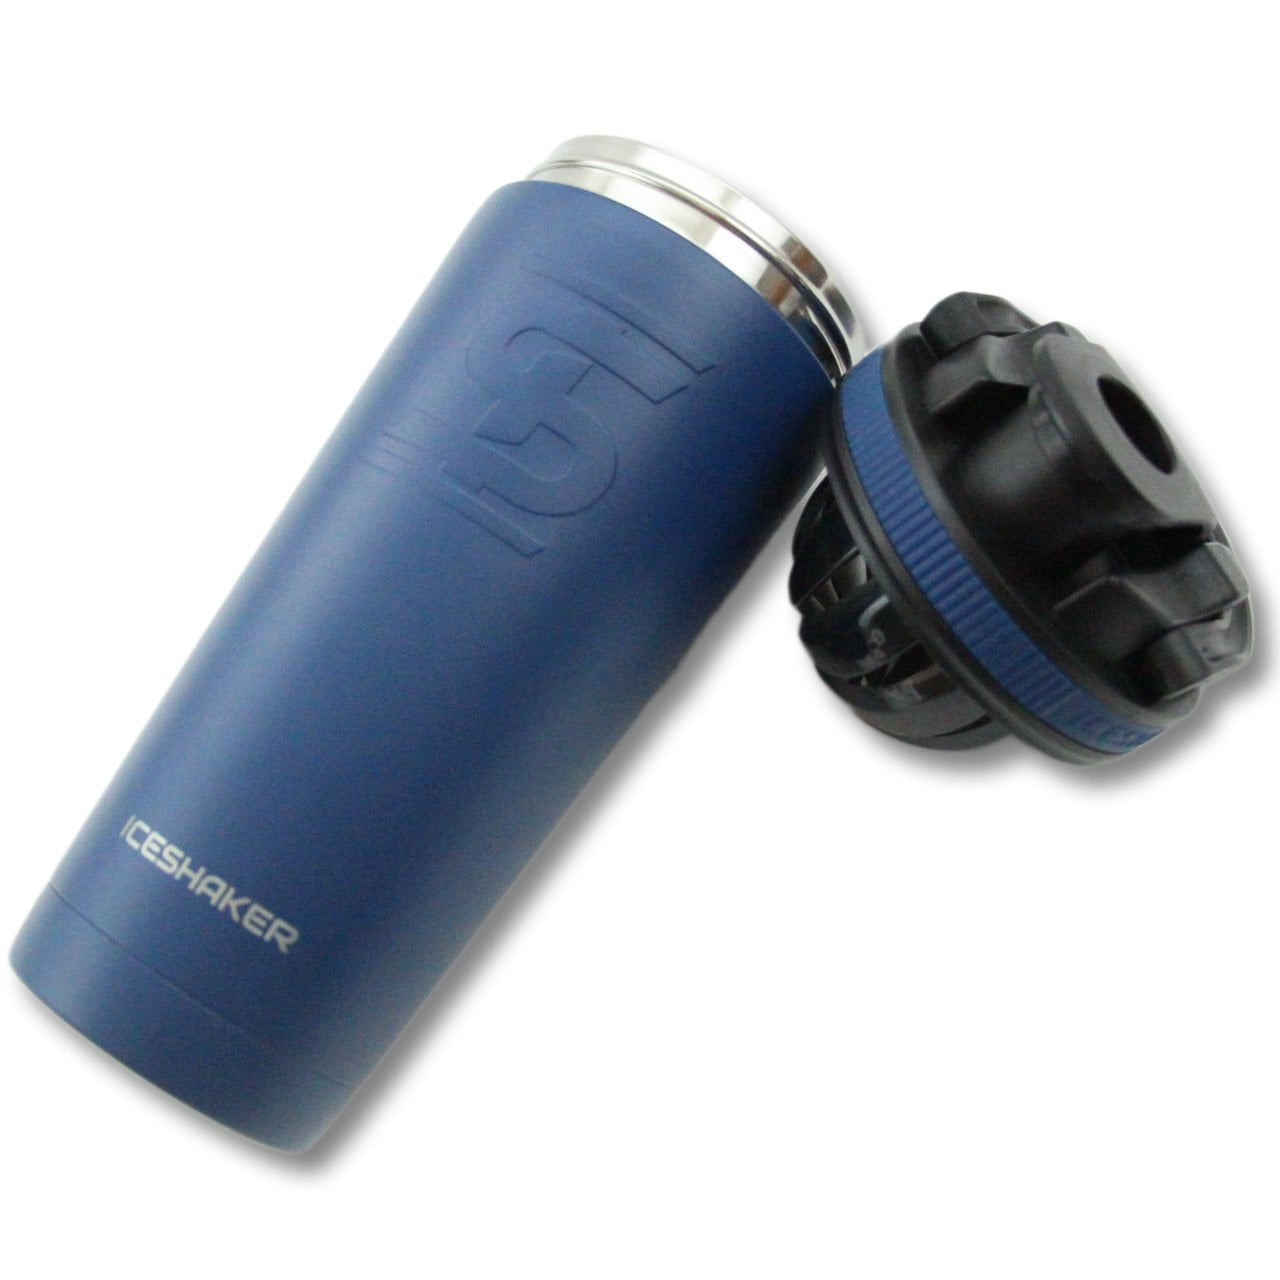 26oz HyPro Insulated Stainless Steel Double Wall Shaker Water Bottle 